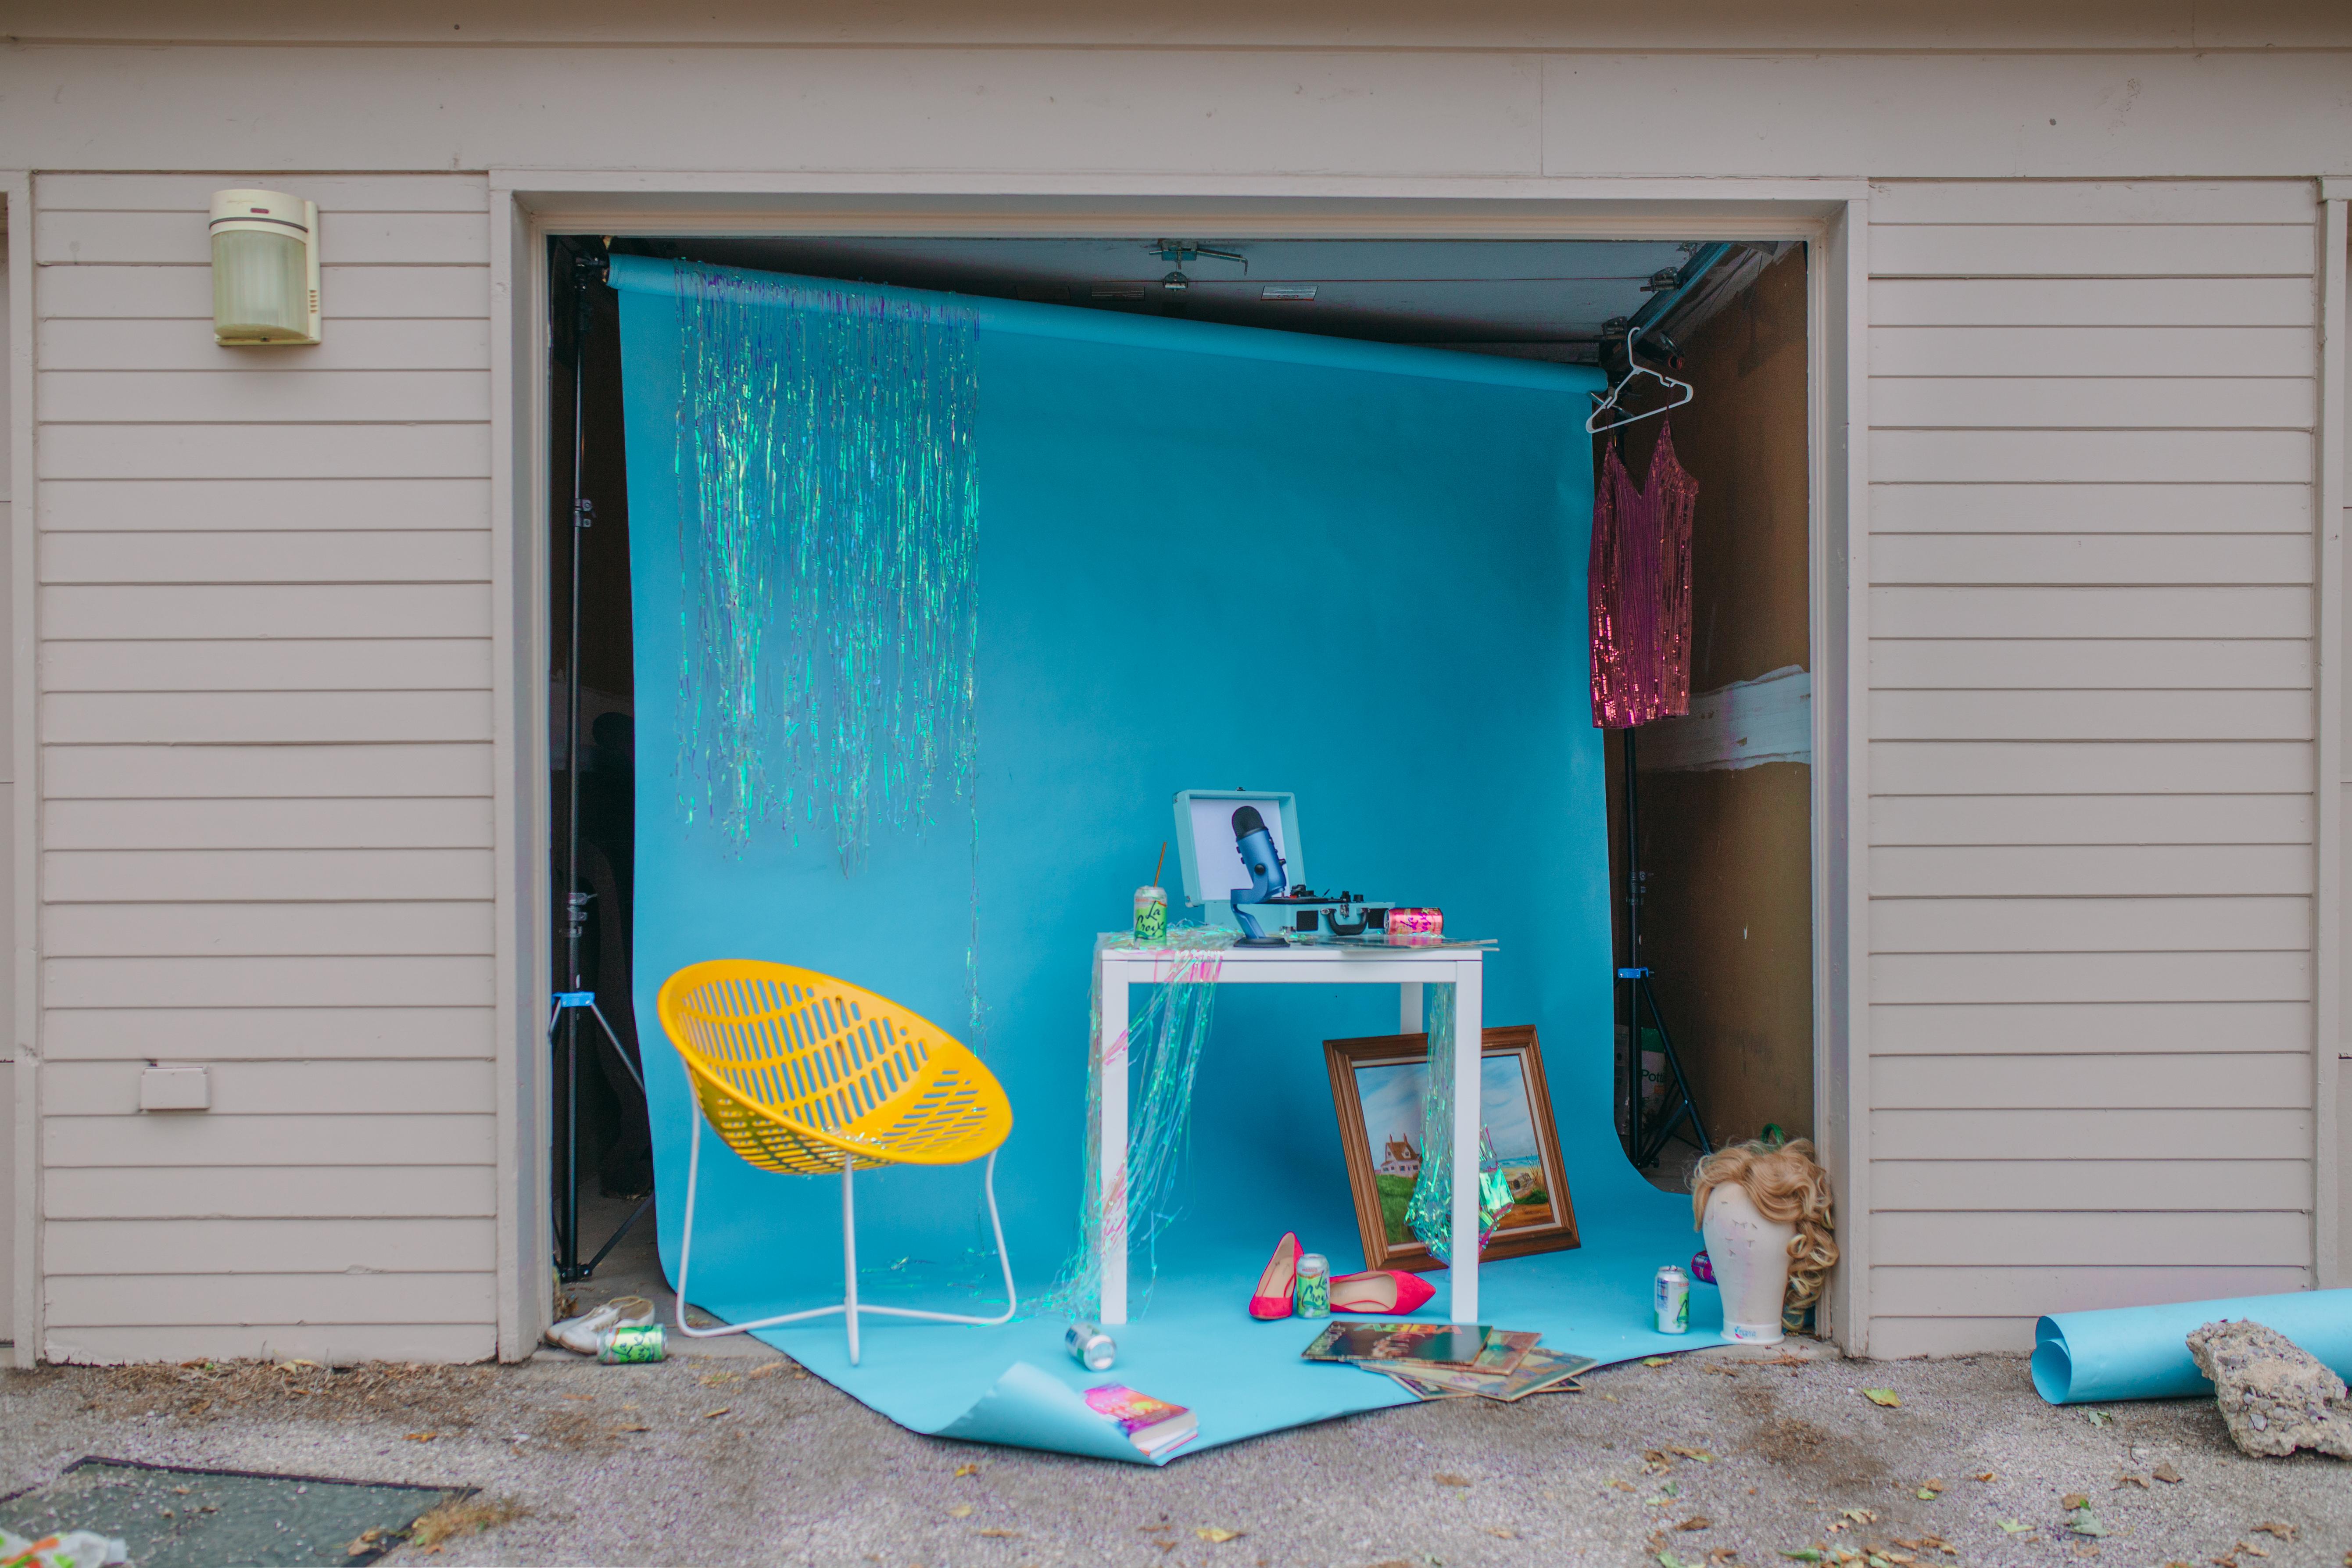 Garage (Garage, Still Life, Backdrop, Chair, Table, Wig, Colorful, Funny) - Photograph by David Pugh